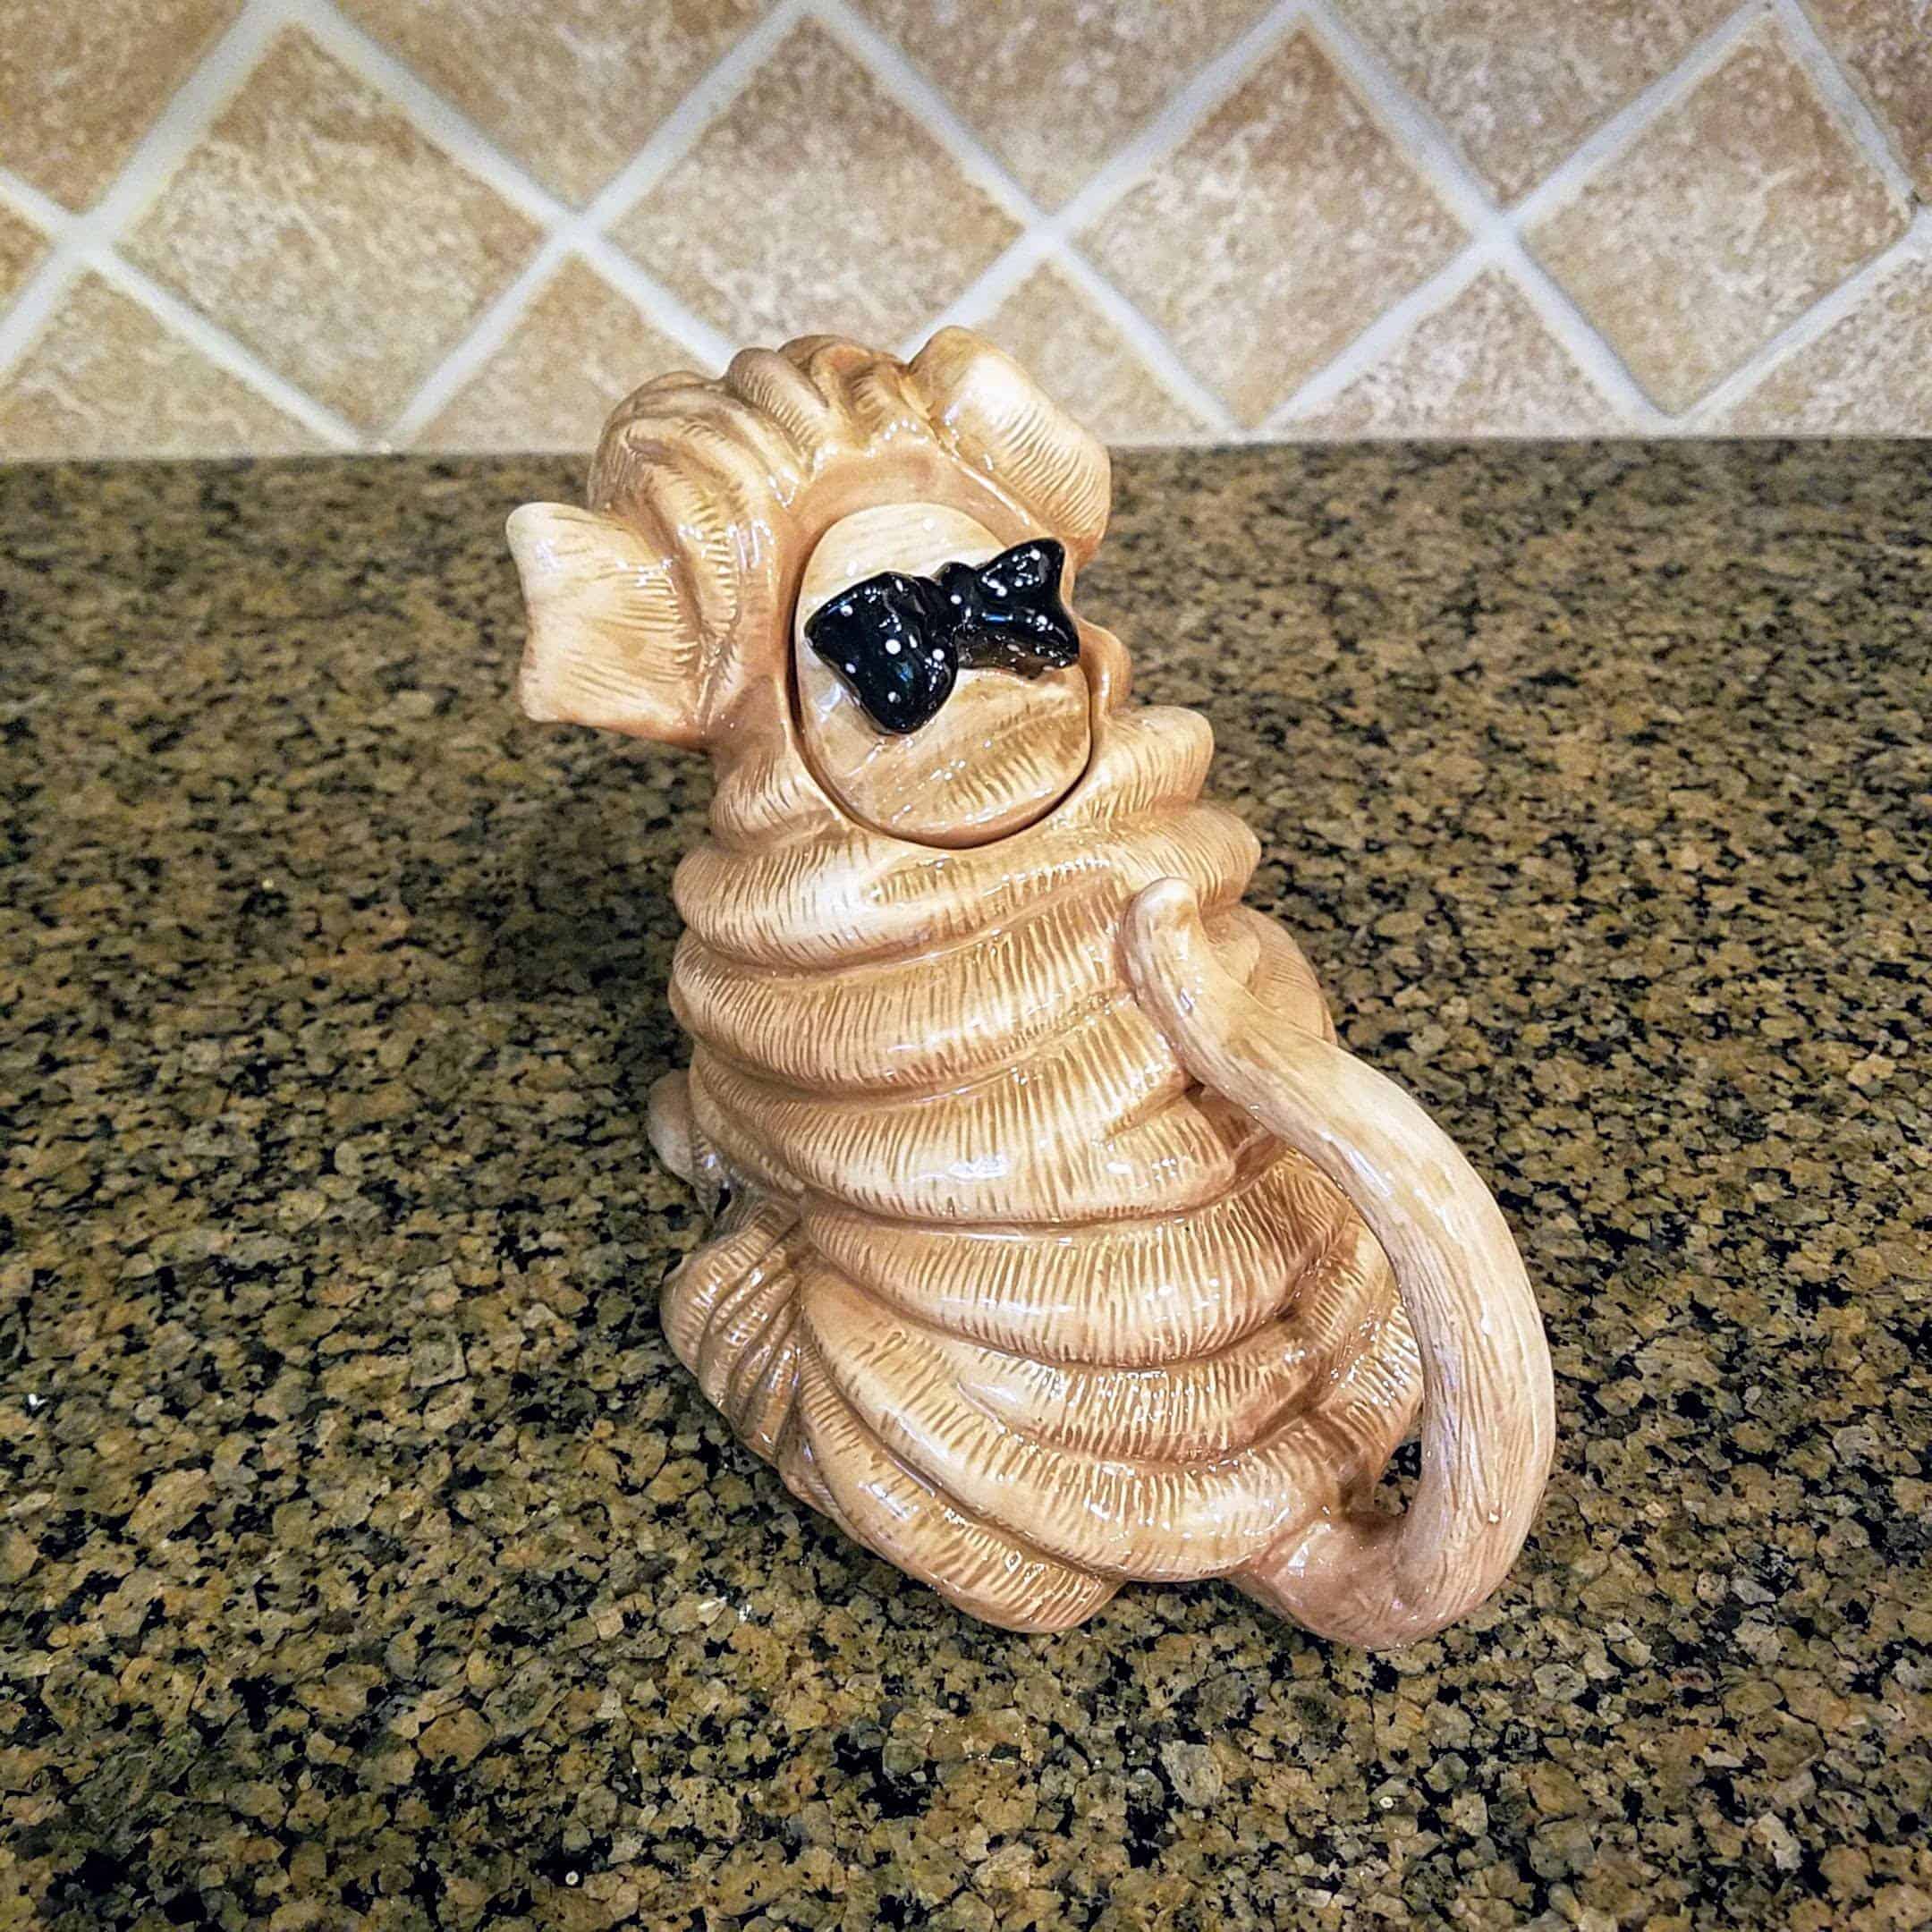 This Shar Pei Teapot is made with love by Premier Homegoods! Shop more unique gift ideas today with Spots Initiatives, the best way to support creators.